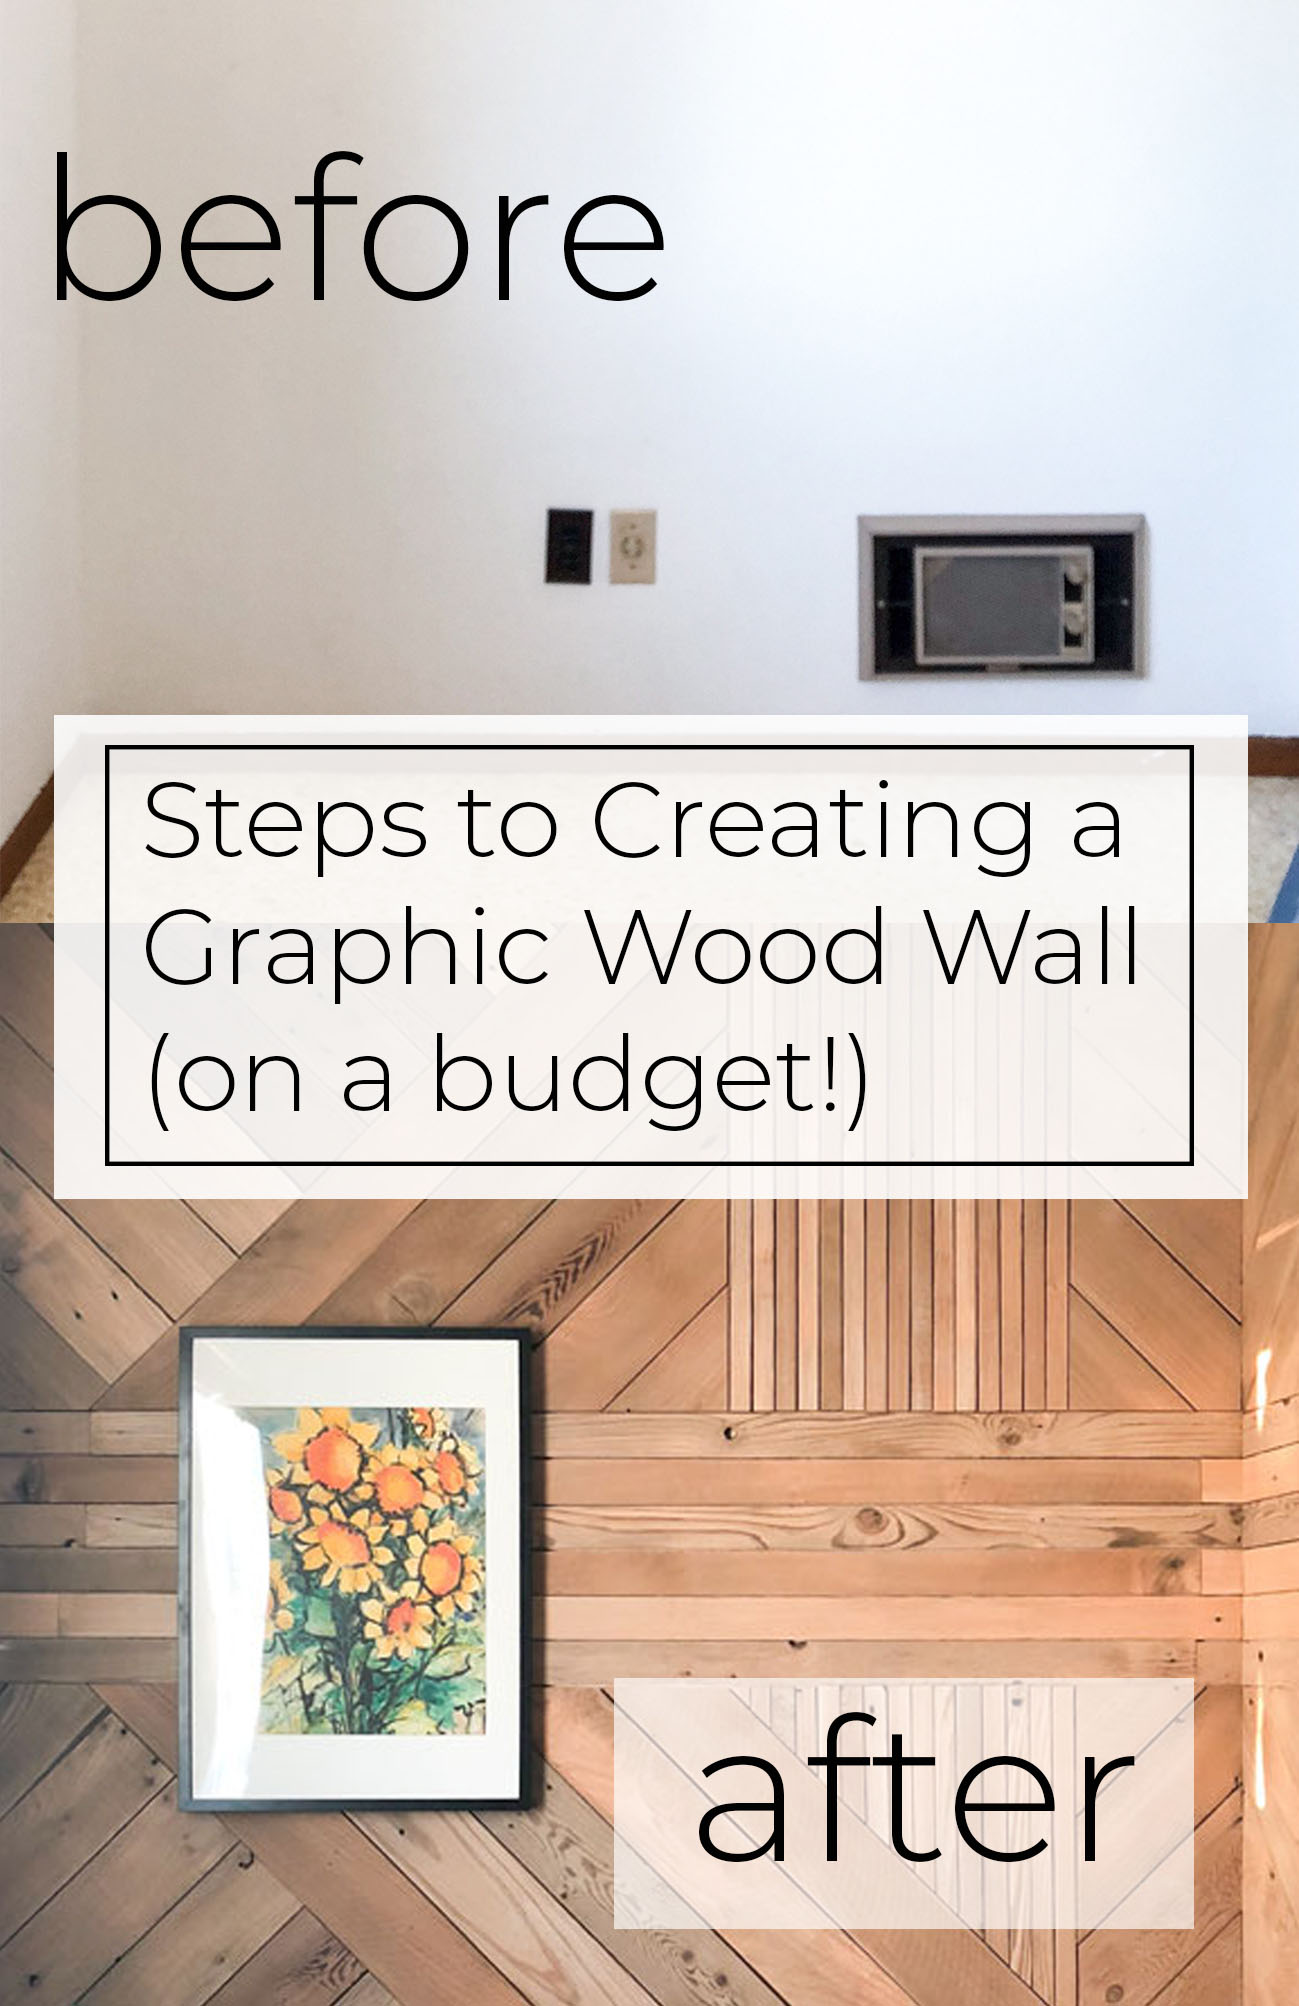 Steps-to-creating-a-graphic-wood-wall-on-a-budget